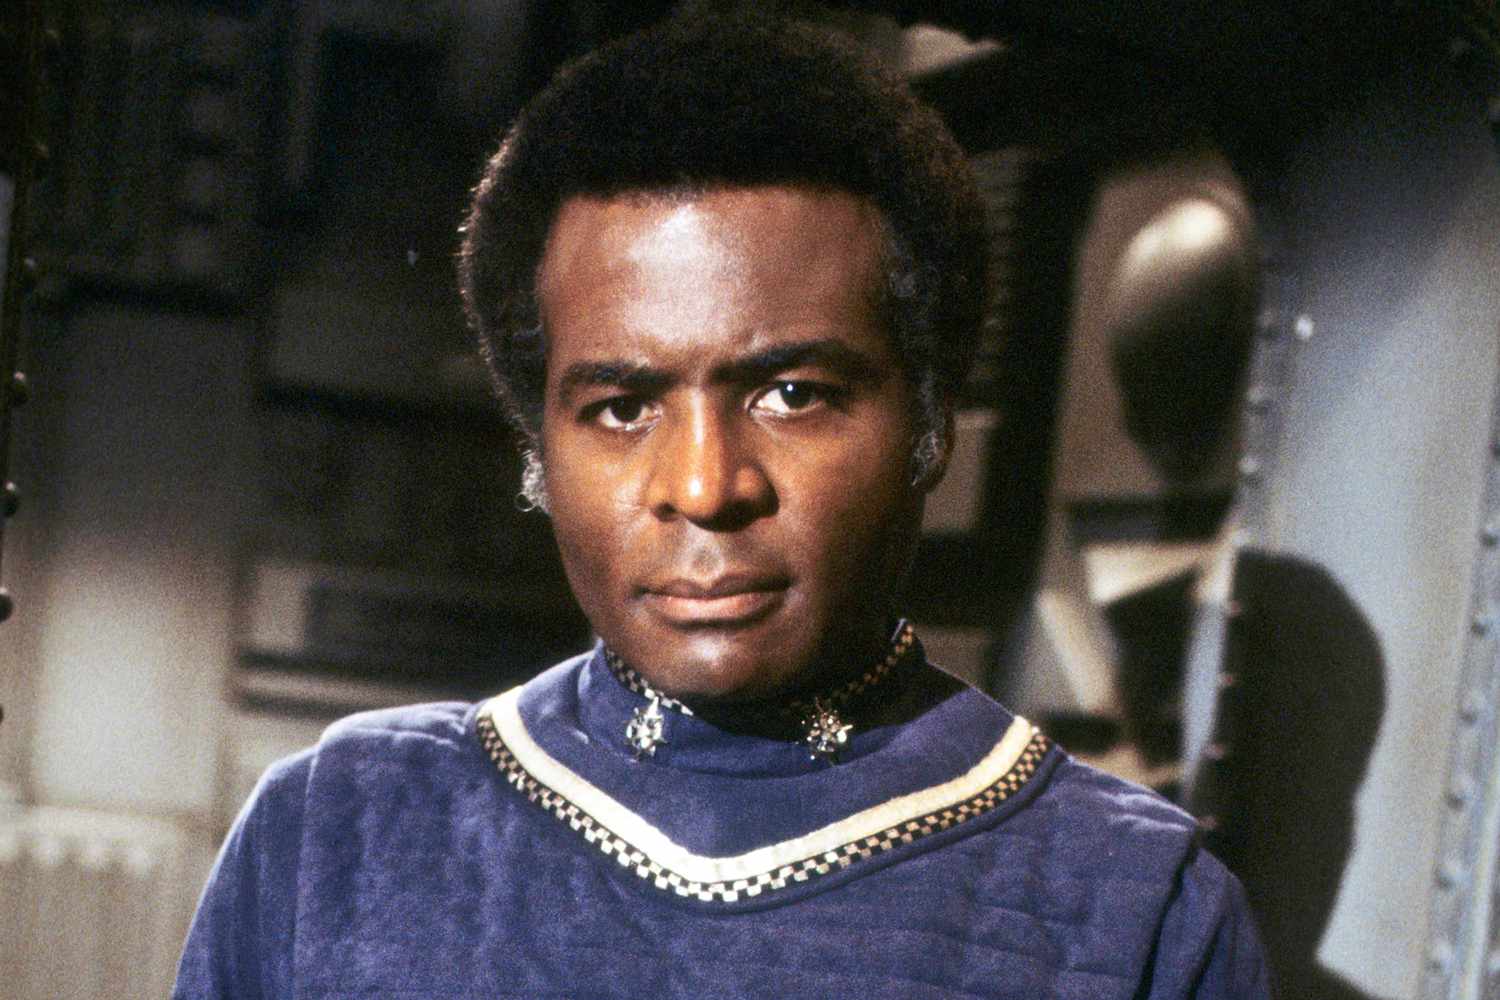 terry carter, actor best known for “battlestar galactica” and “mccloud,” dead at 95